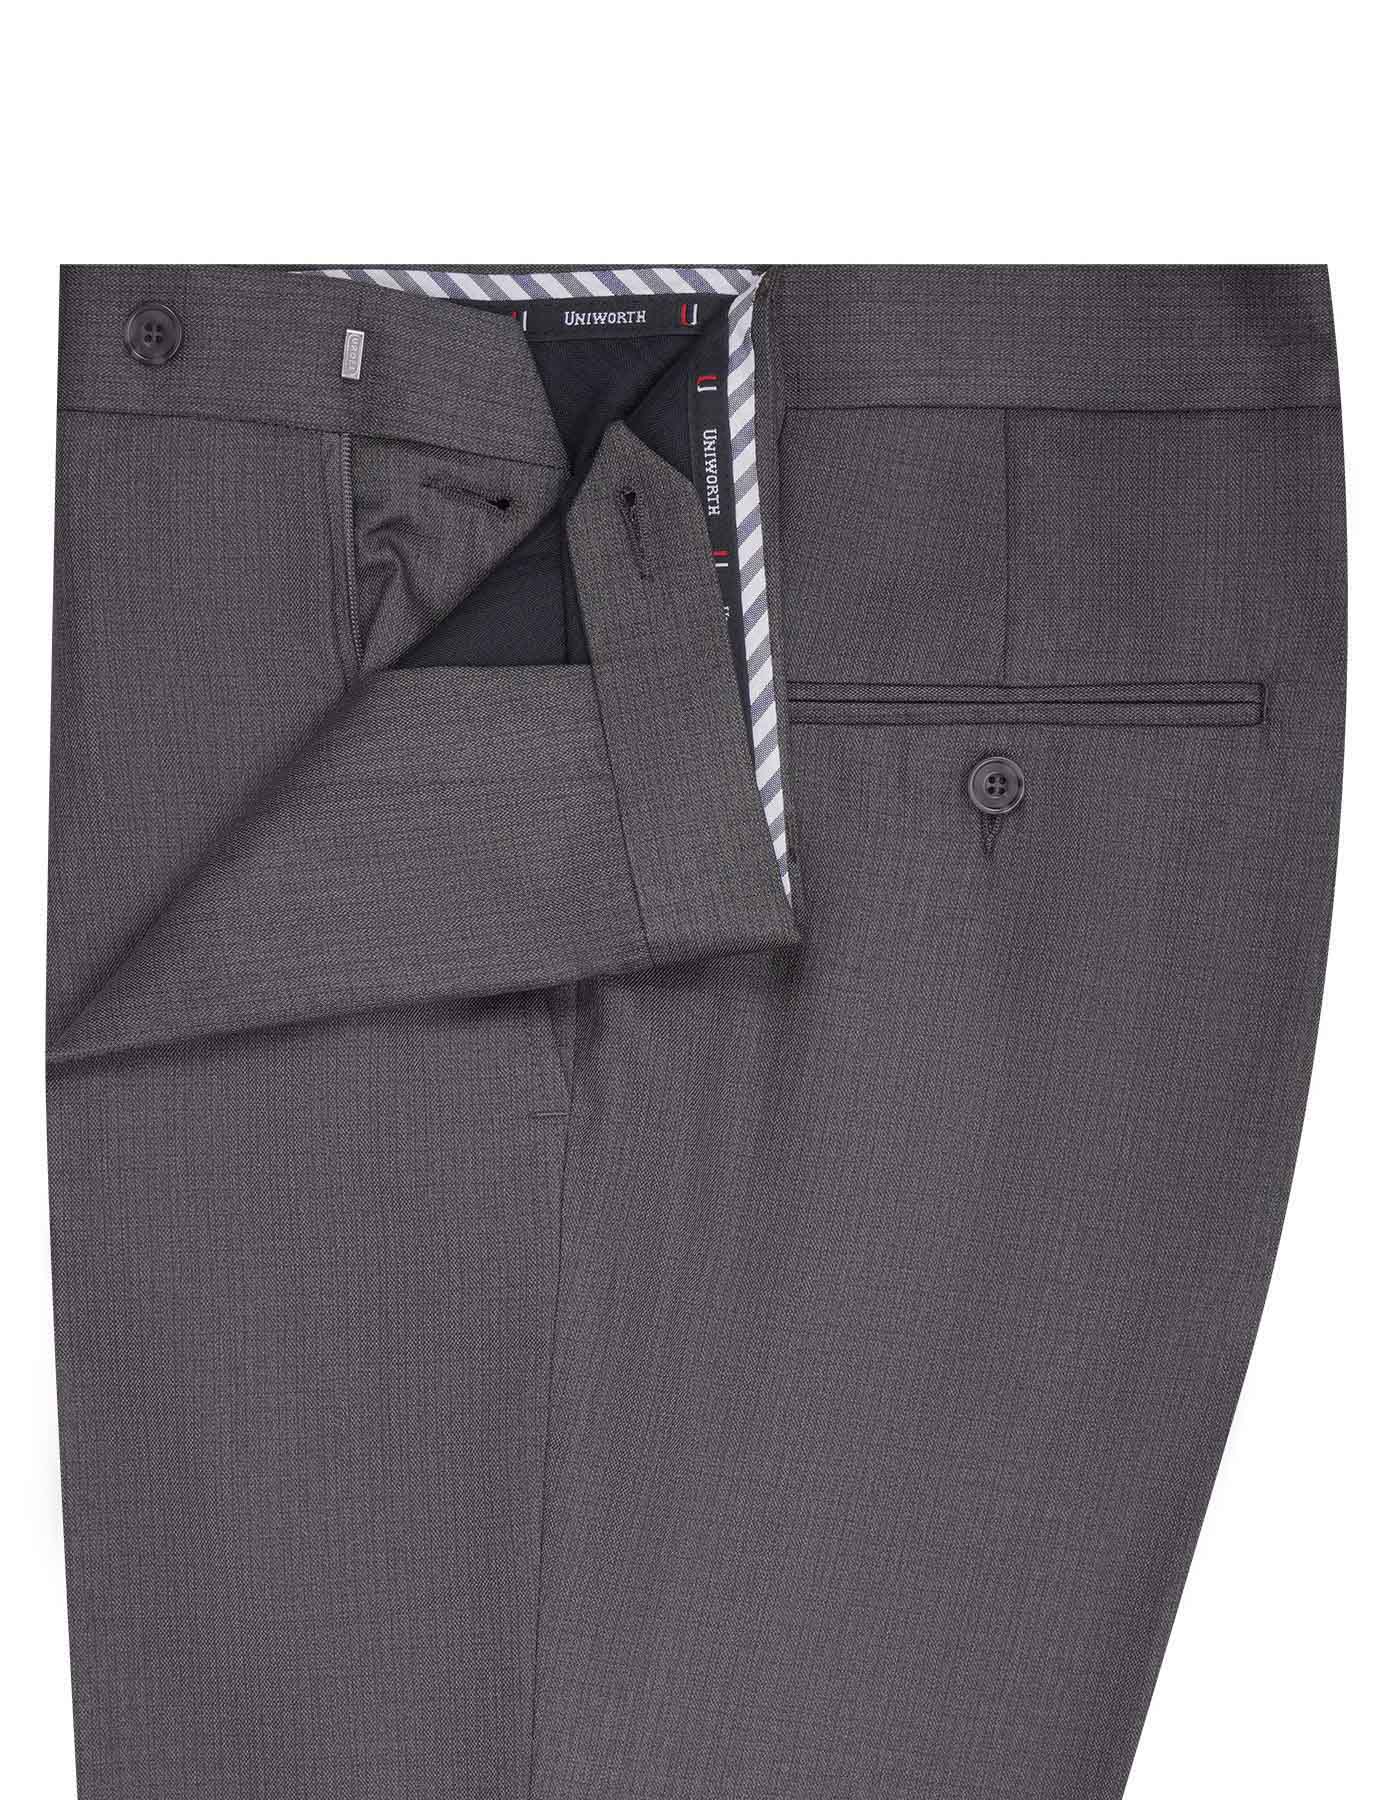 Formal Trouser Chocolate 30 FT375S Uniworth TF375